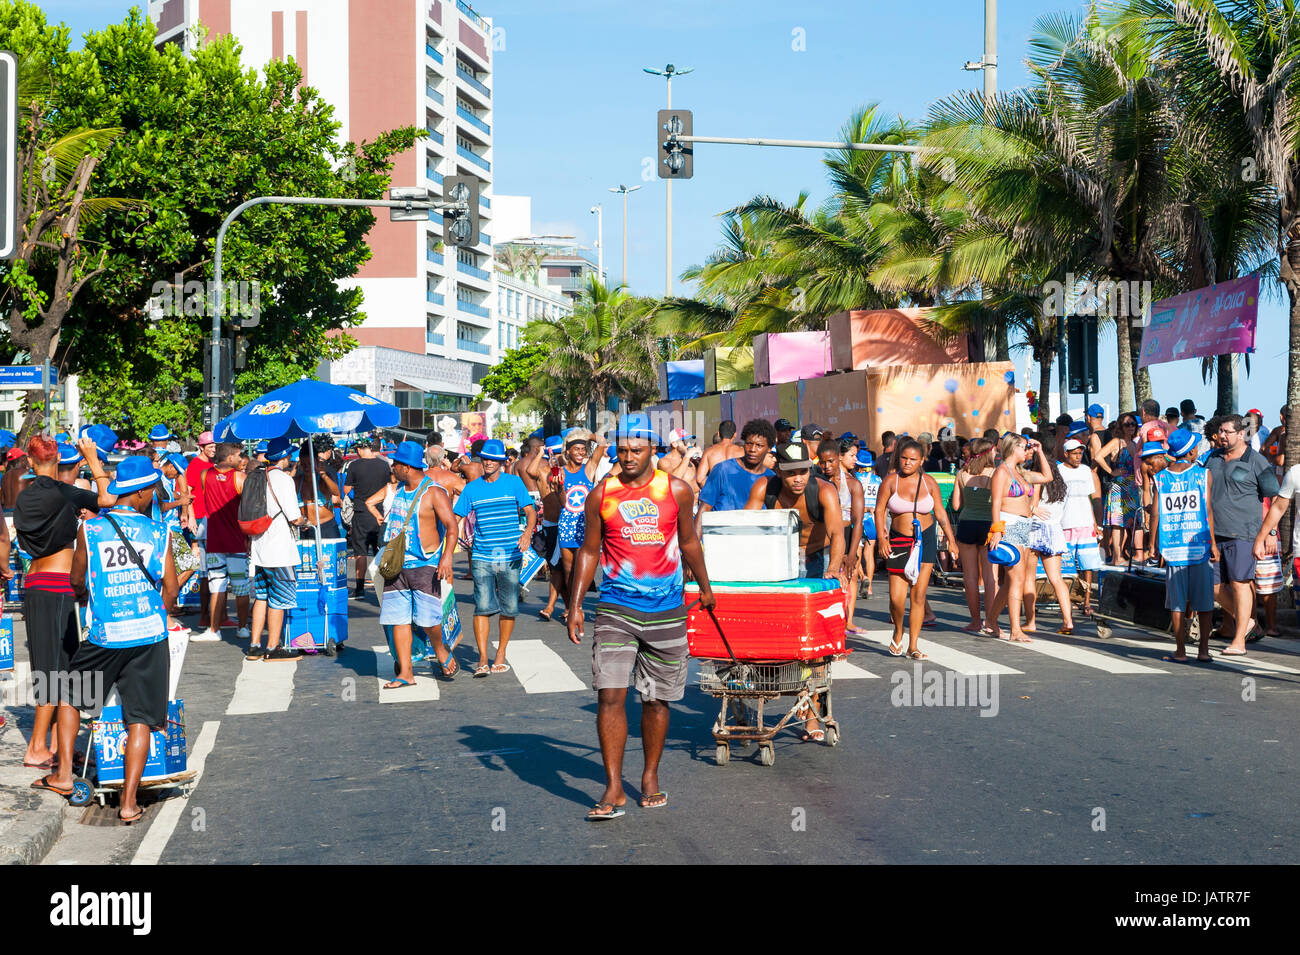 RIO DE JANEIRO - FEBRUARY 11, 2017: Crowds of young people and vendors gather at a morning street party in Ipanema during the city's carnival Stock Photo